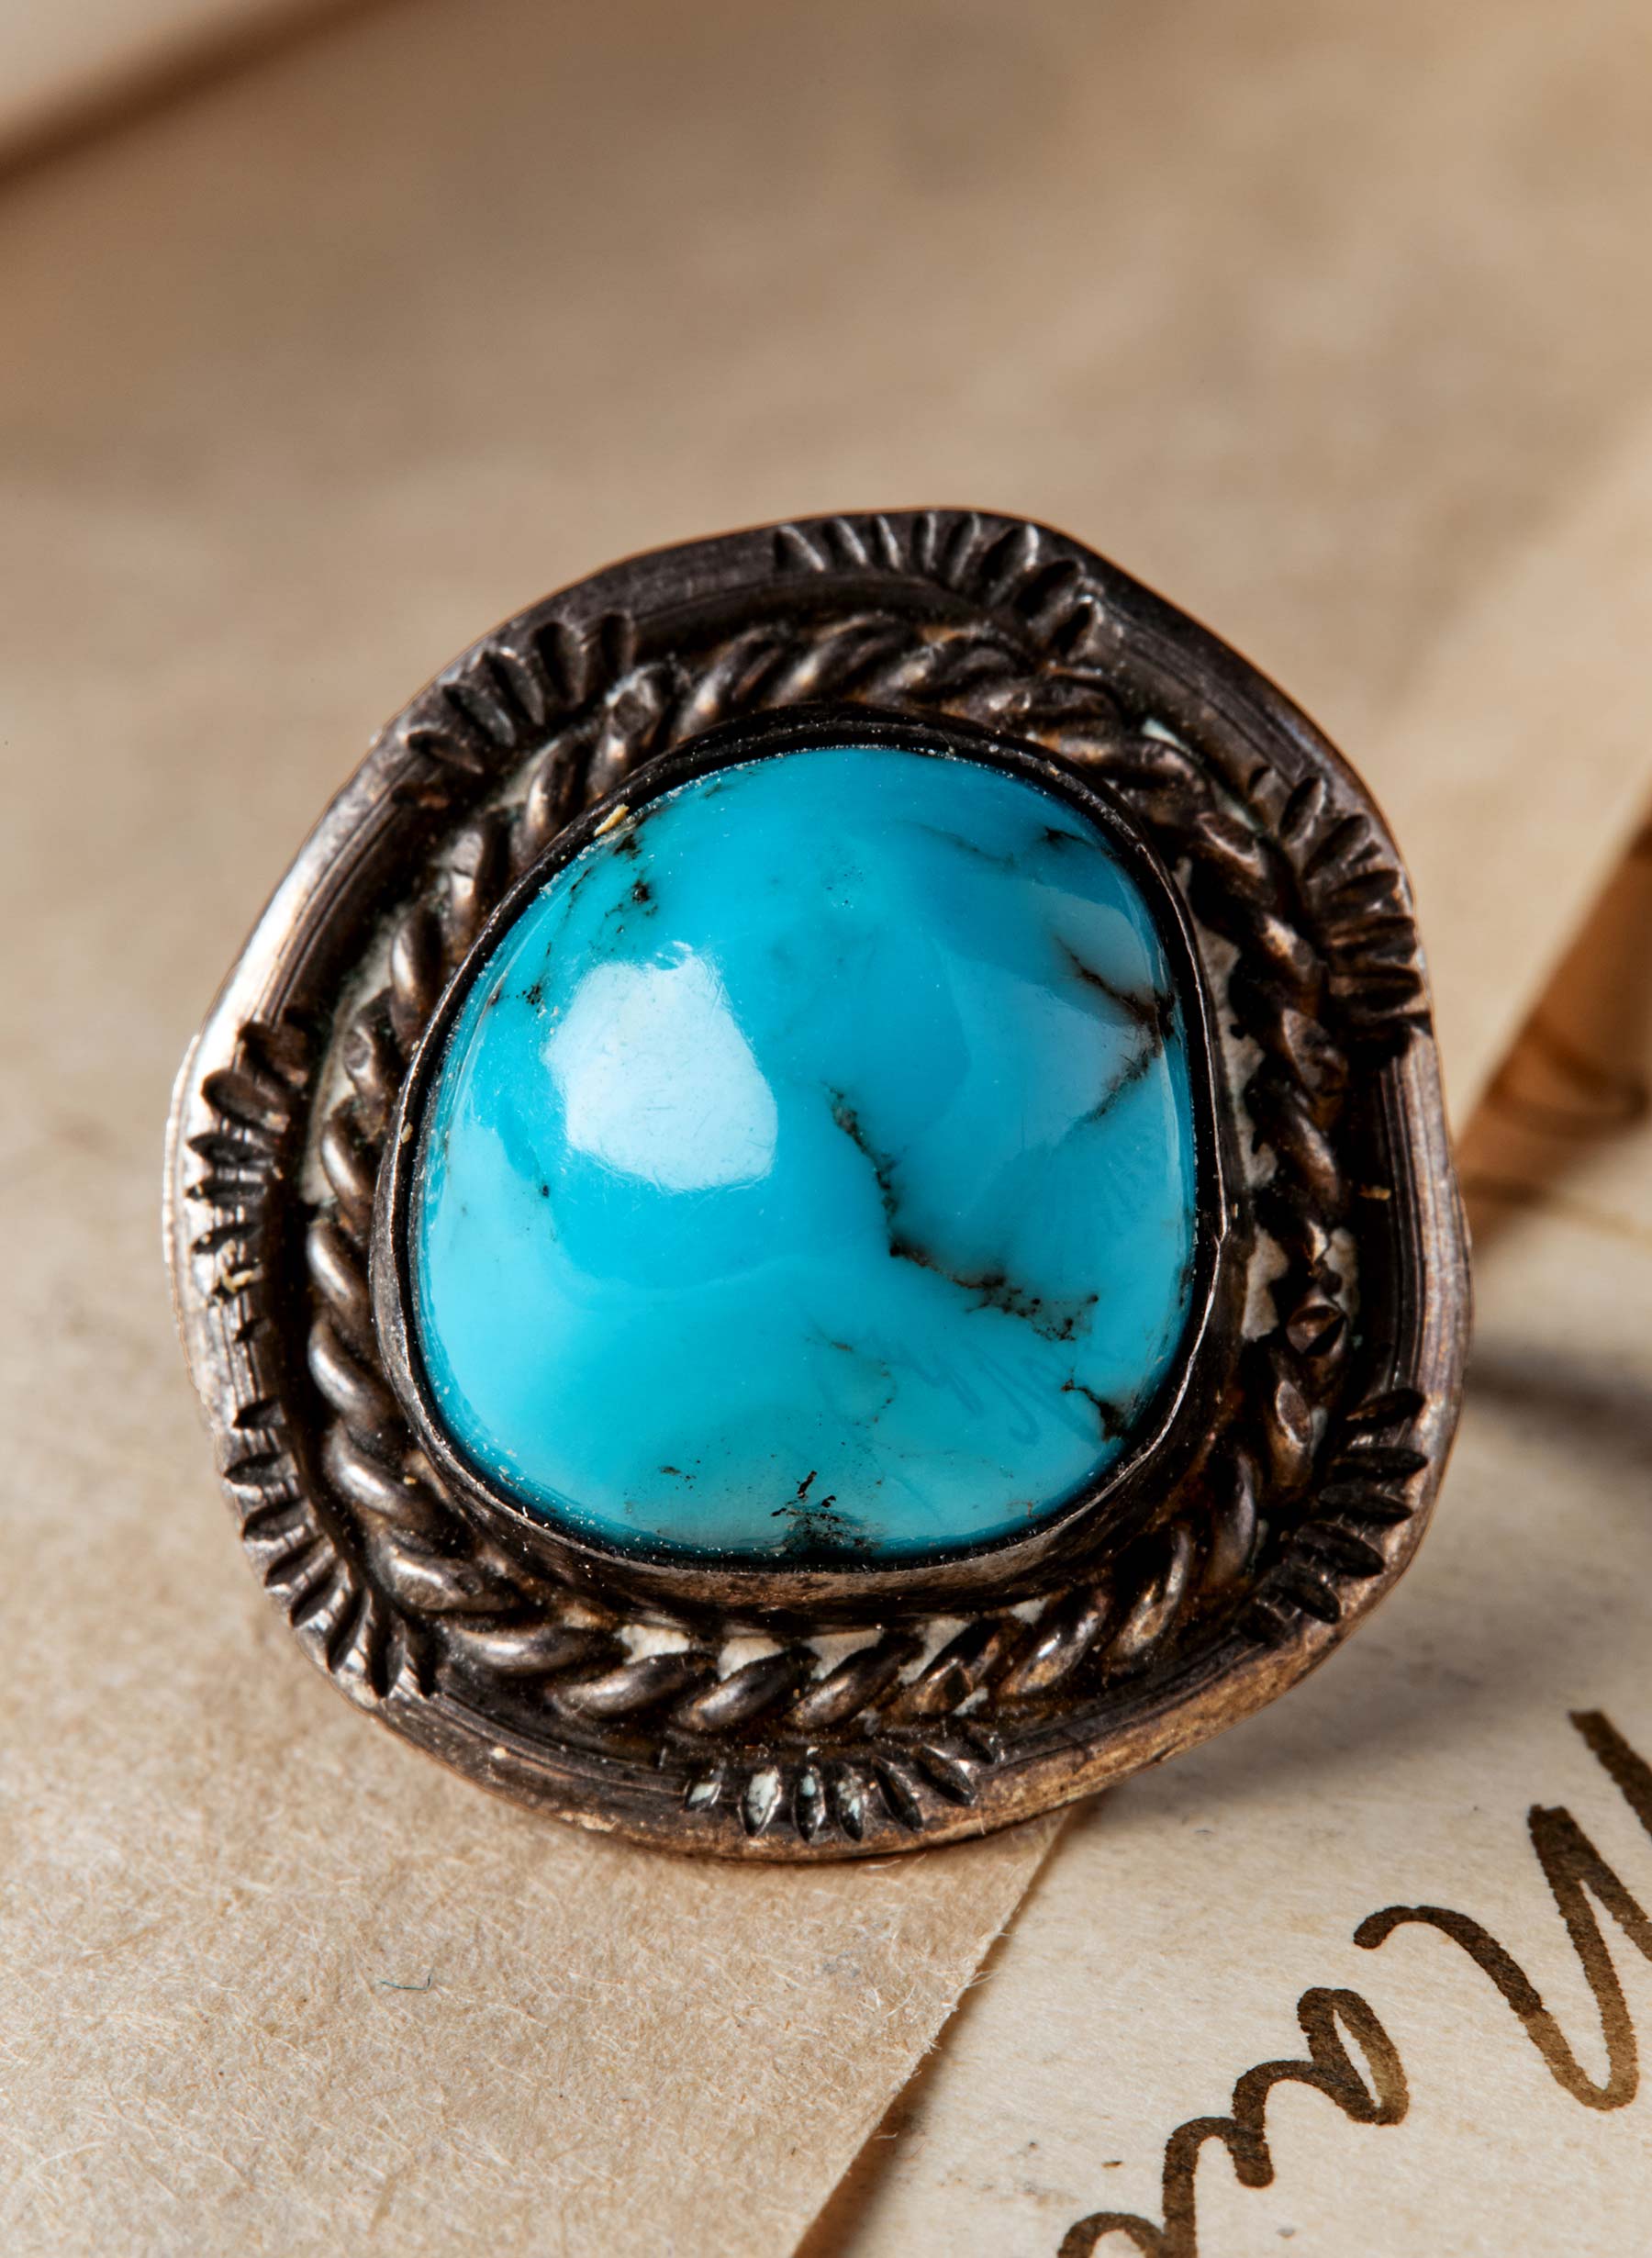 Body jewelry, Dishware, Wood, Feather, Natural material, Serveware, Tableware, Jewellery, Electric blue, Circle